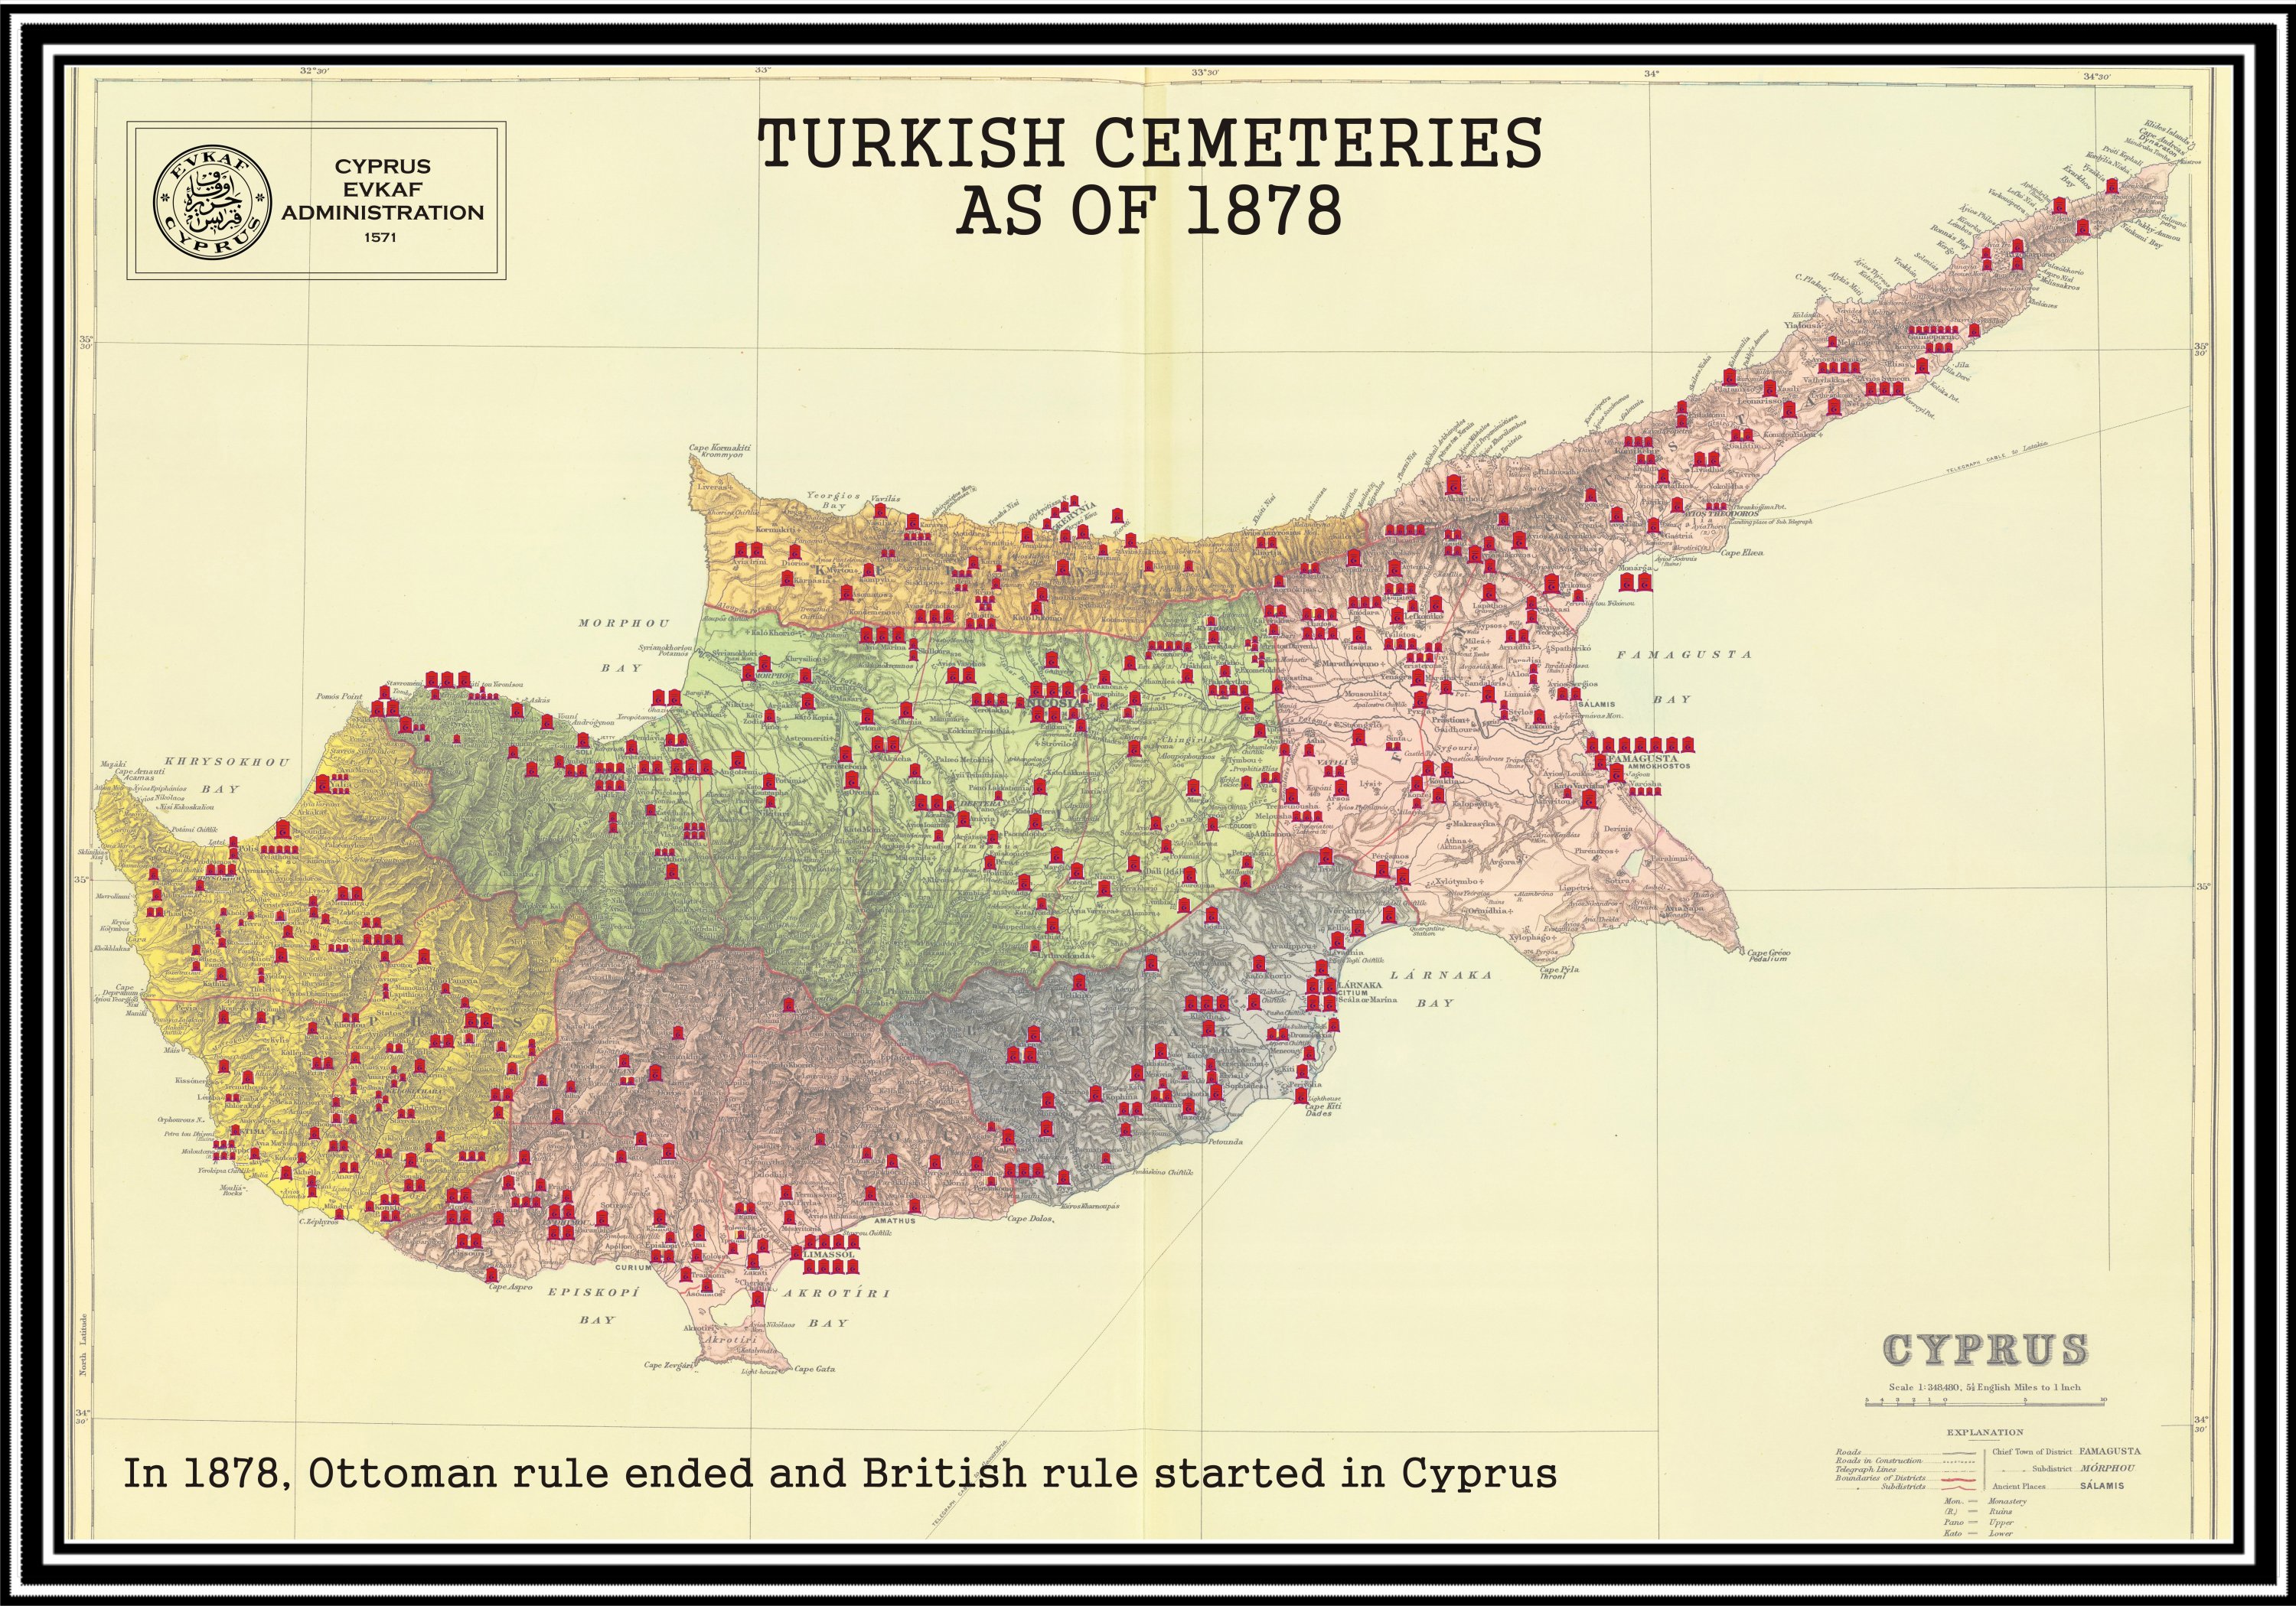 This map provided by the Evkaf Foundation shows Muslim and Turkish cemeteries administered by the foundation in Cyprus in 1878, when the British assumed the control of the island from the Ottomans.